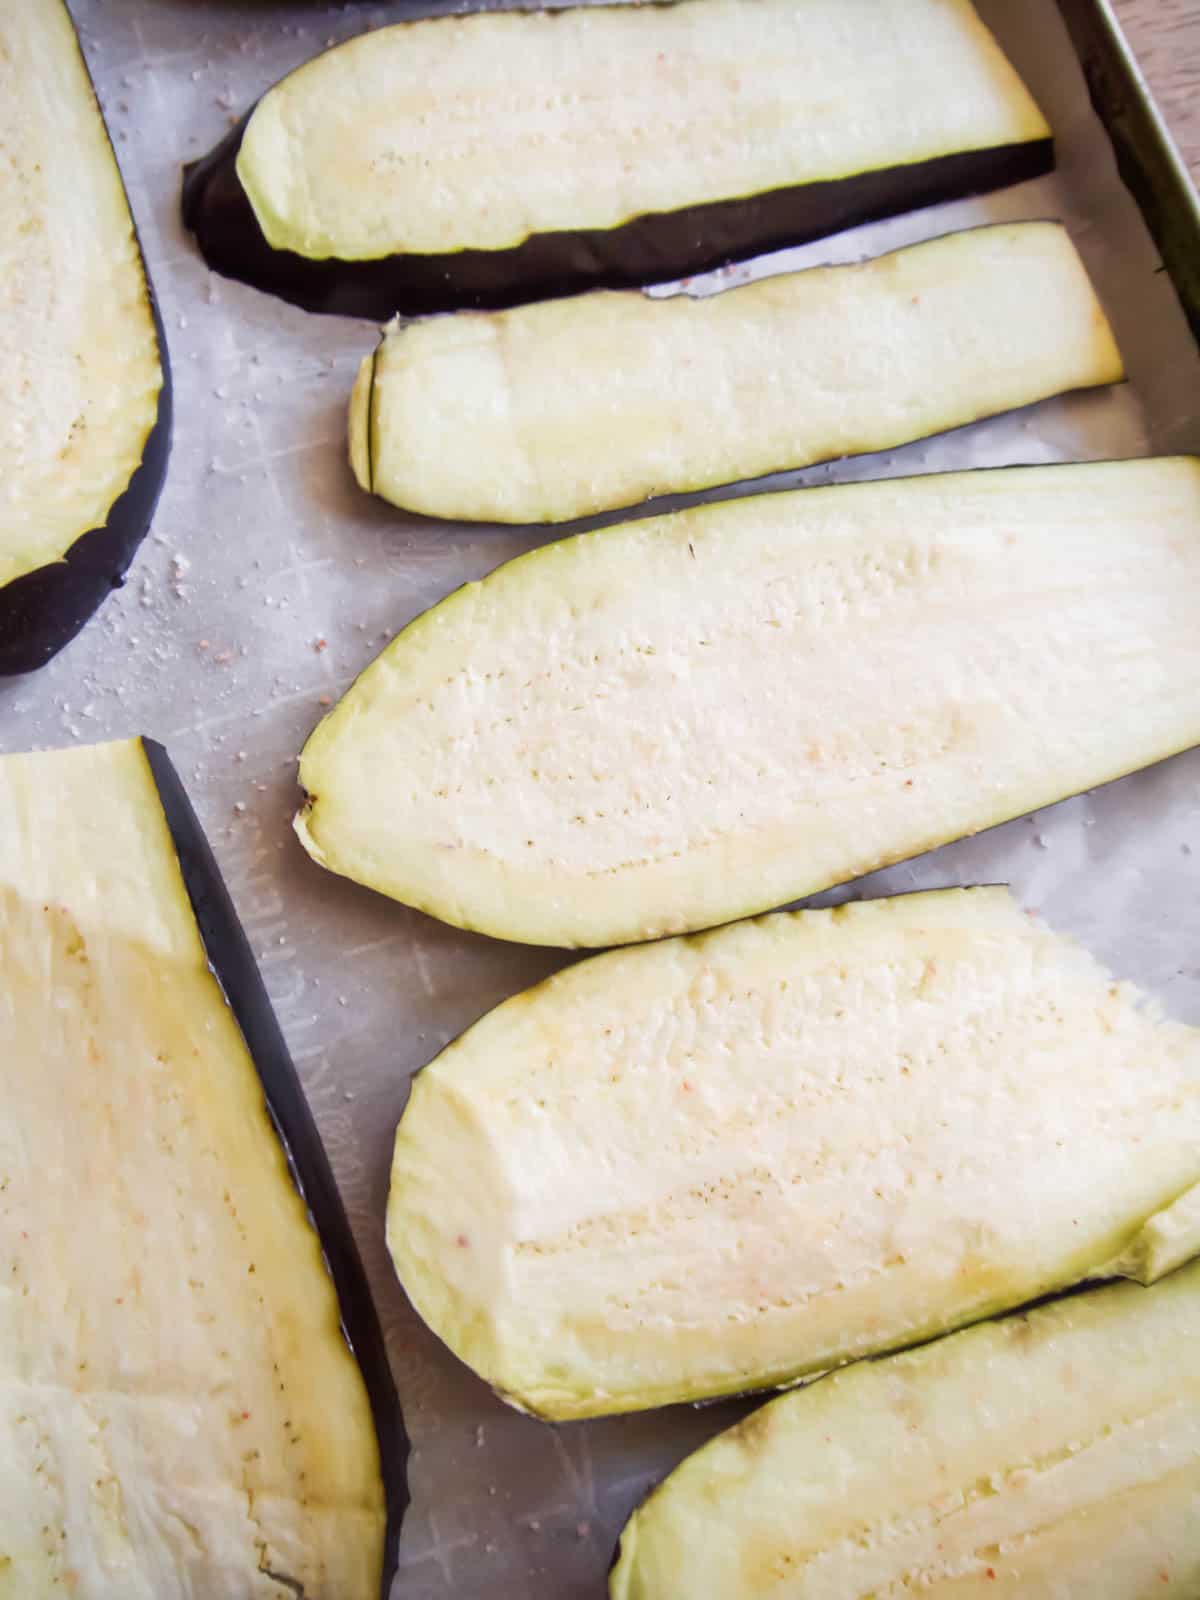 Sliced eggplant that is salted.